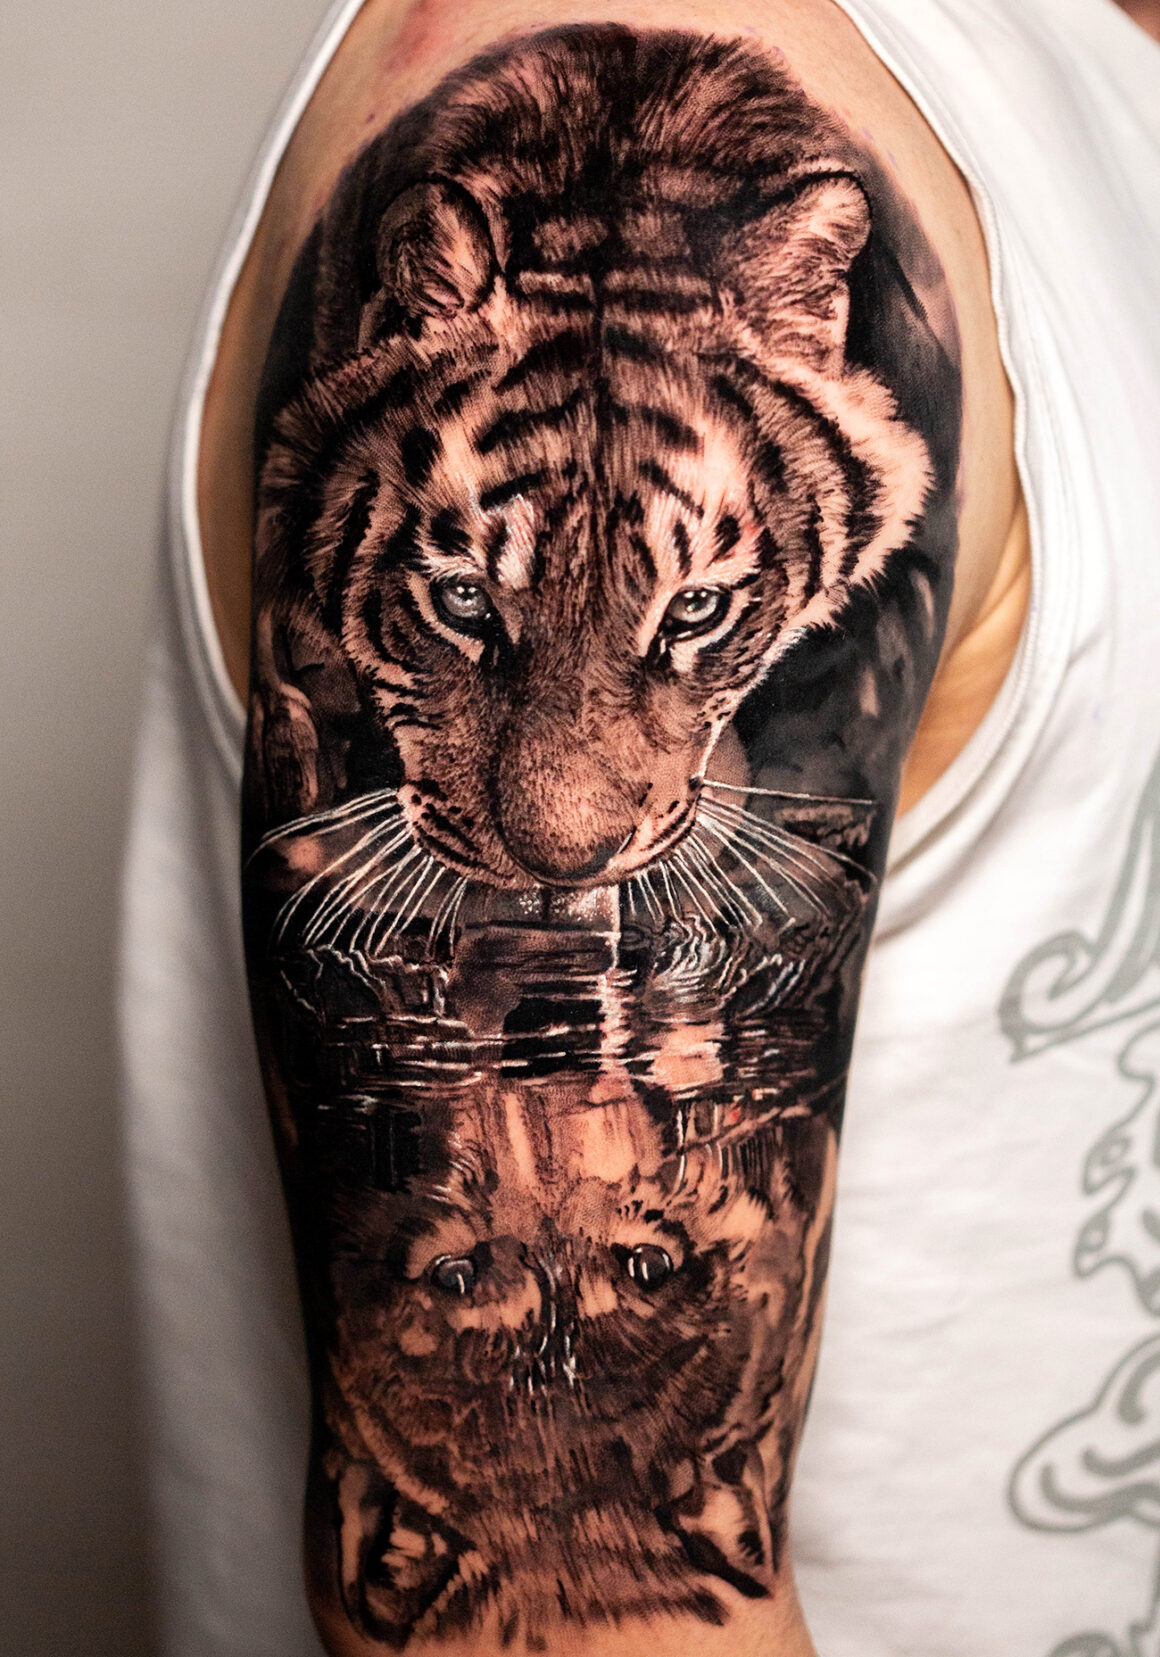 Tattoo by Angélique Grimm, @angeliquegrimmtattoo